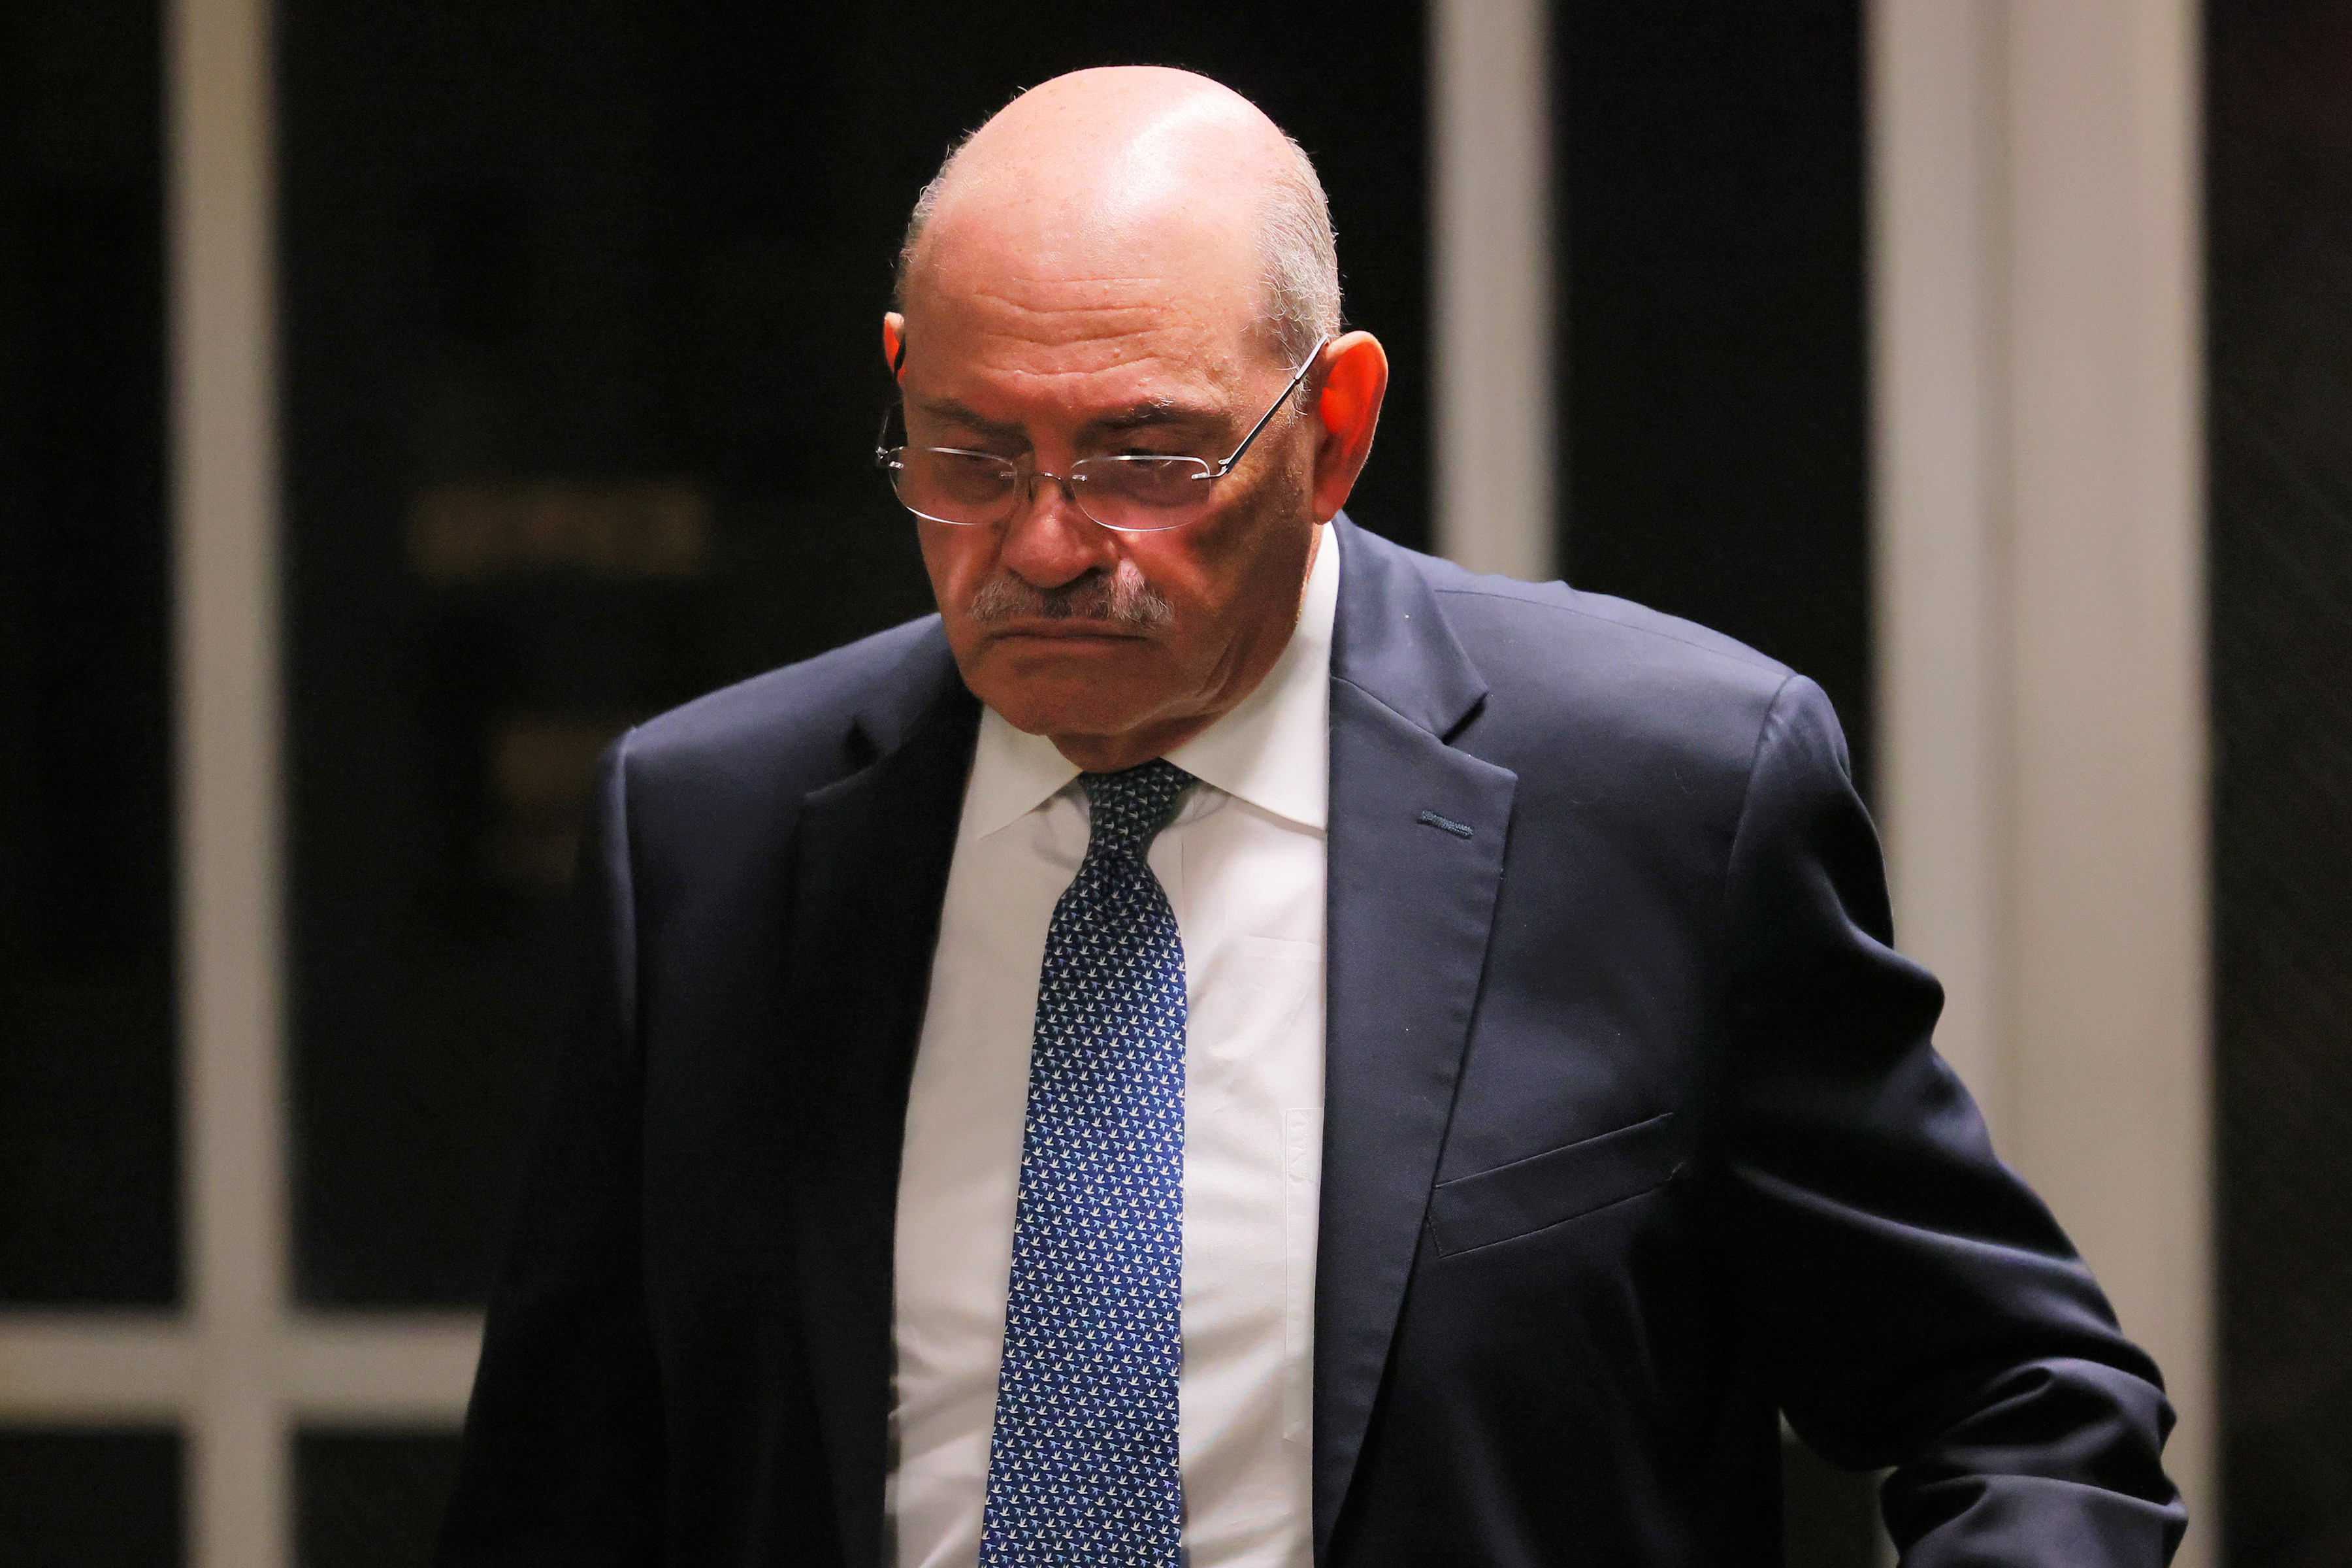 Allen Weisselberg, a retired executive in Donald Trump’s real estate empire, was sentenced on Wednesday to five months in jail for lying under oath during his testimony in the civil fraud lawsuit brought against the former president by New York’s attorney general. Photo: TNS/File